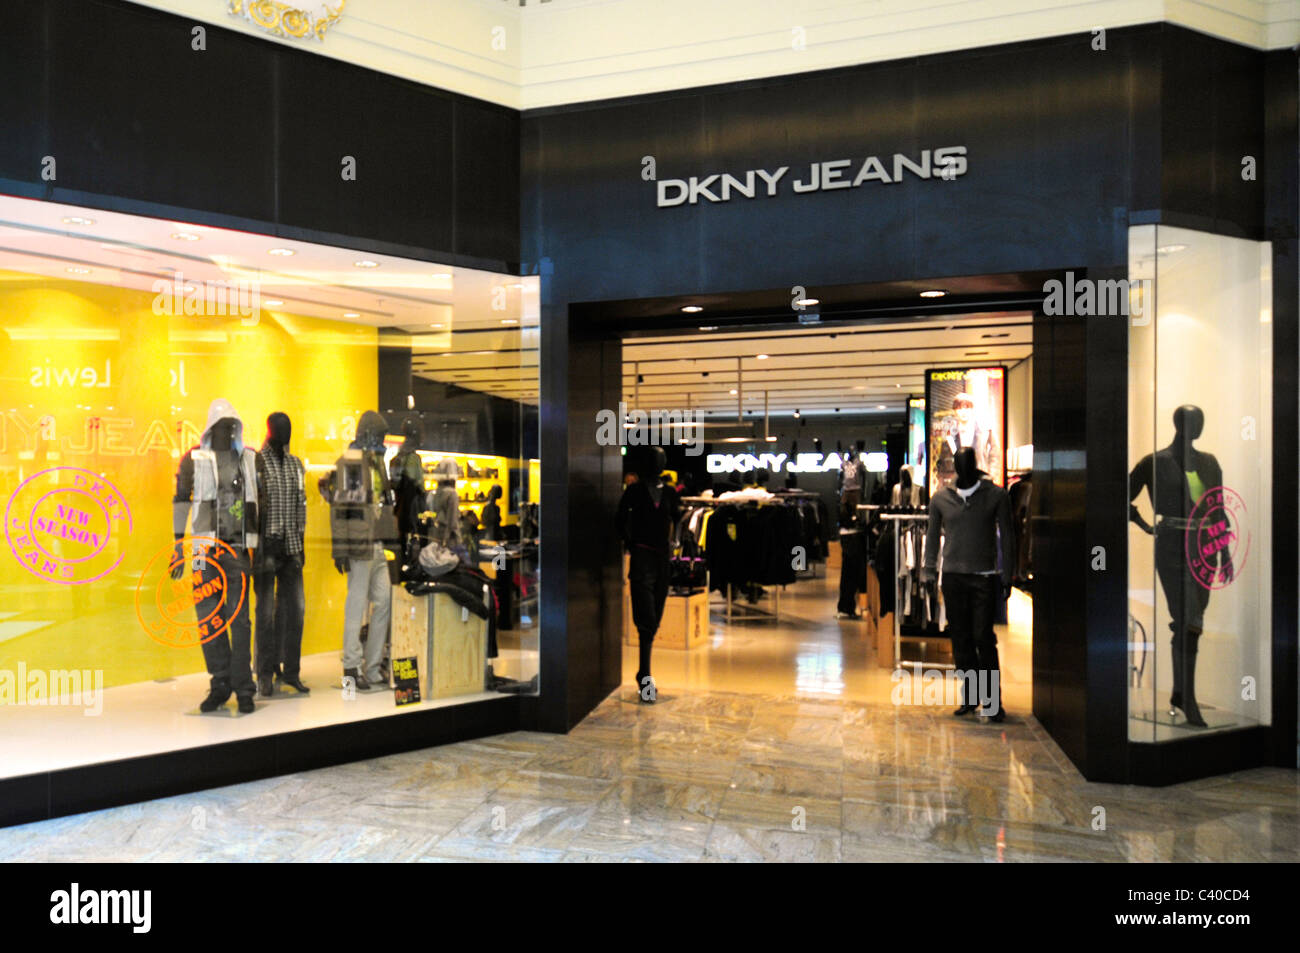 Dkny Shop High Resolution Stock Photography and Images - Alamy